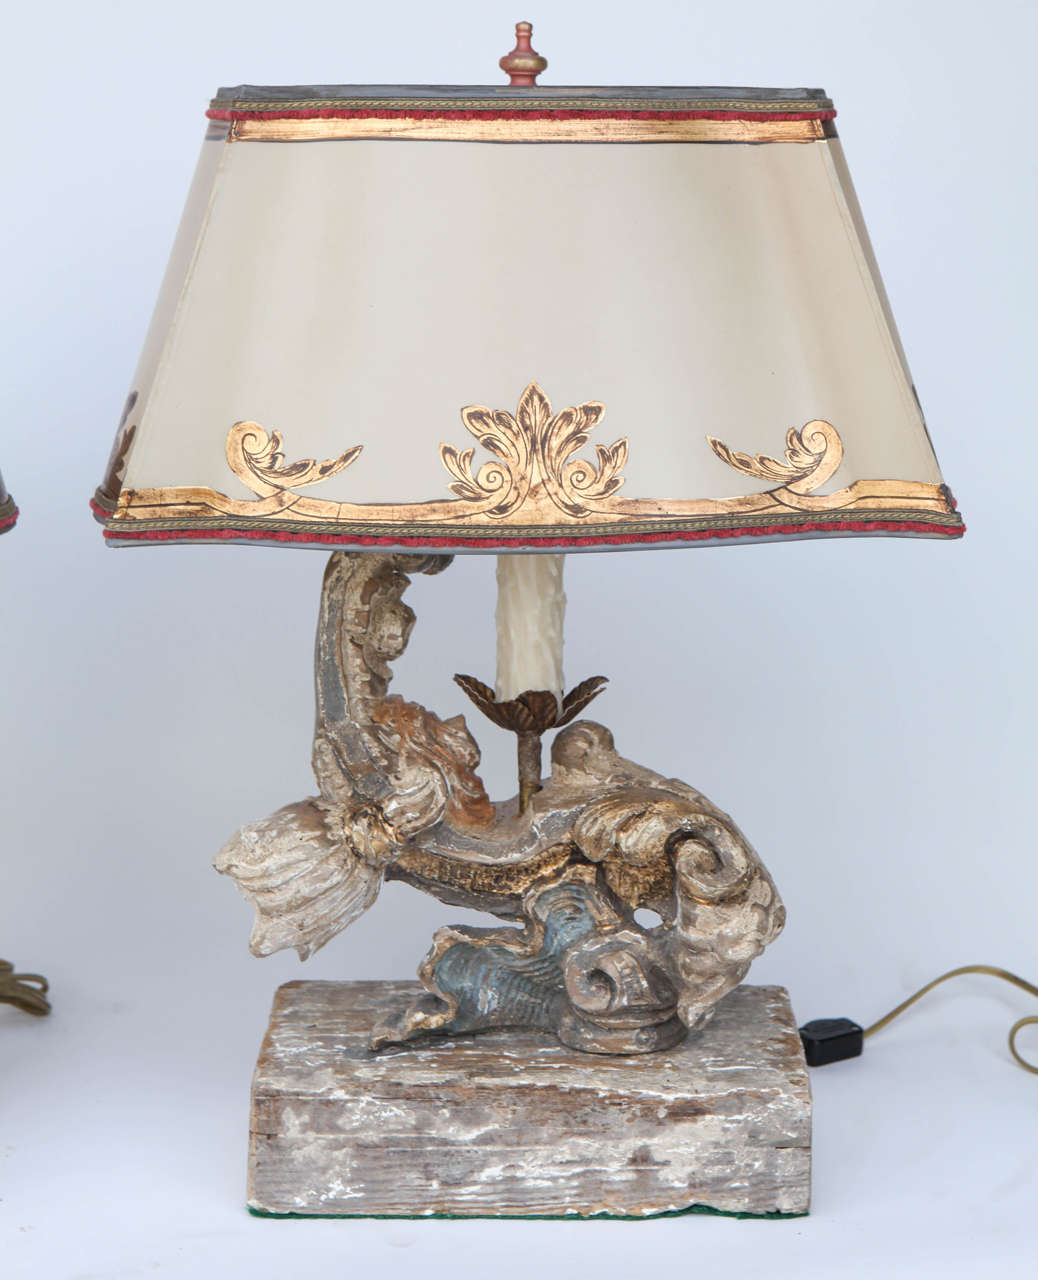 19th c. Pair of Italian Antique Wood Fragments converted to Lamps. The Shades are included and are Hand Made of Parchment Paper. They are Hand Gilded and Decorated. The lamps have been newly wired.